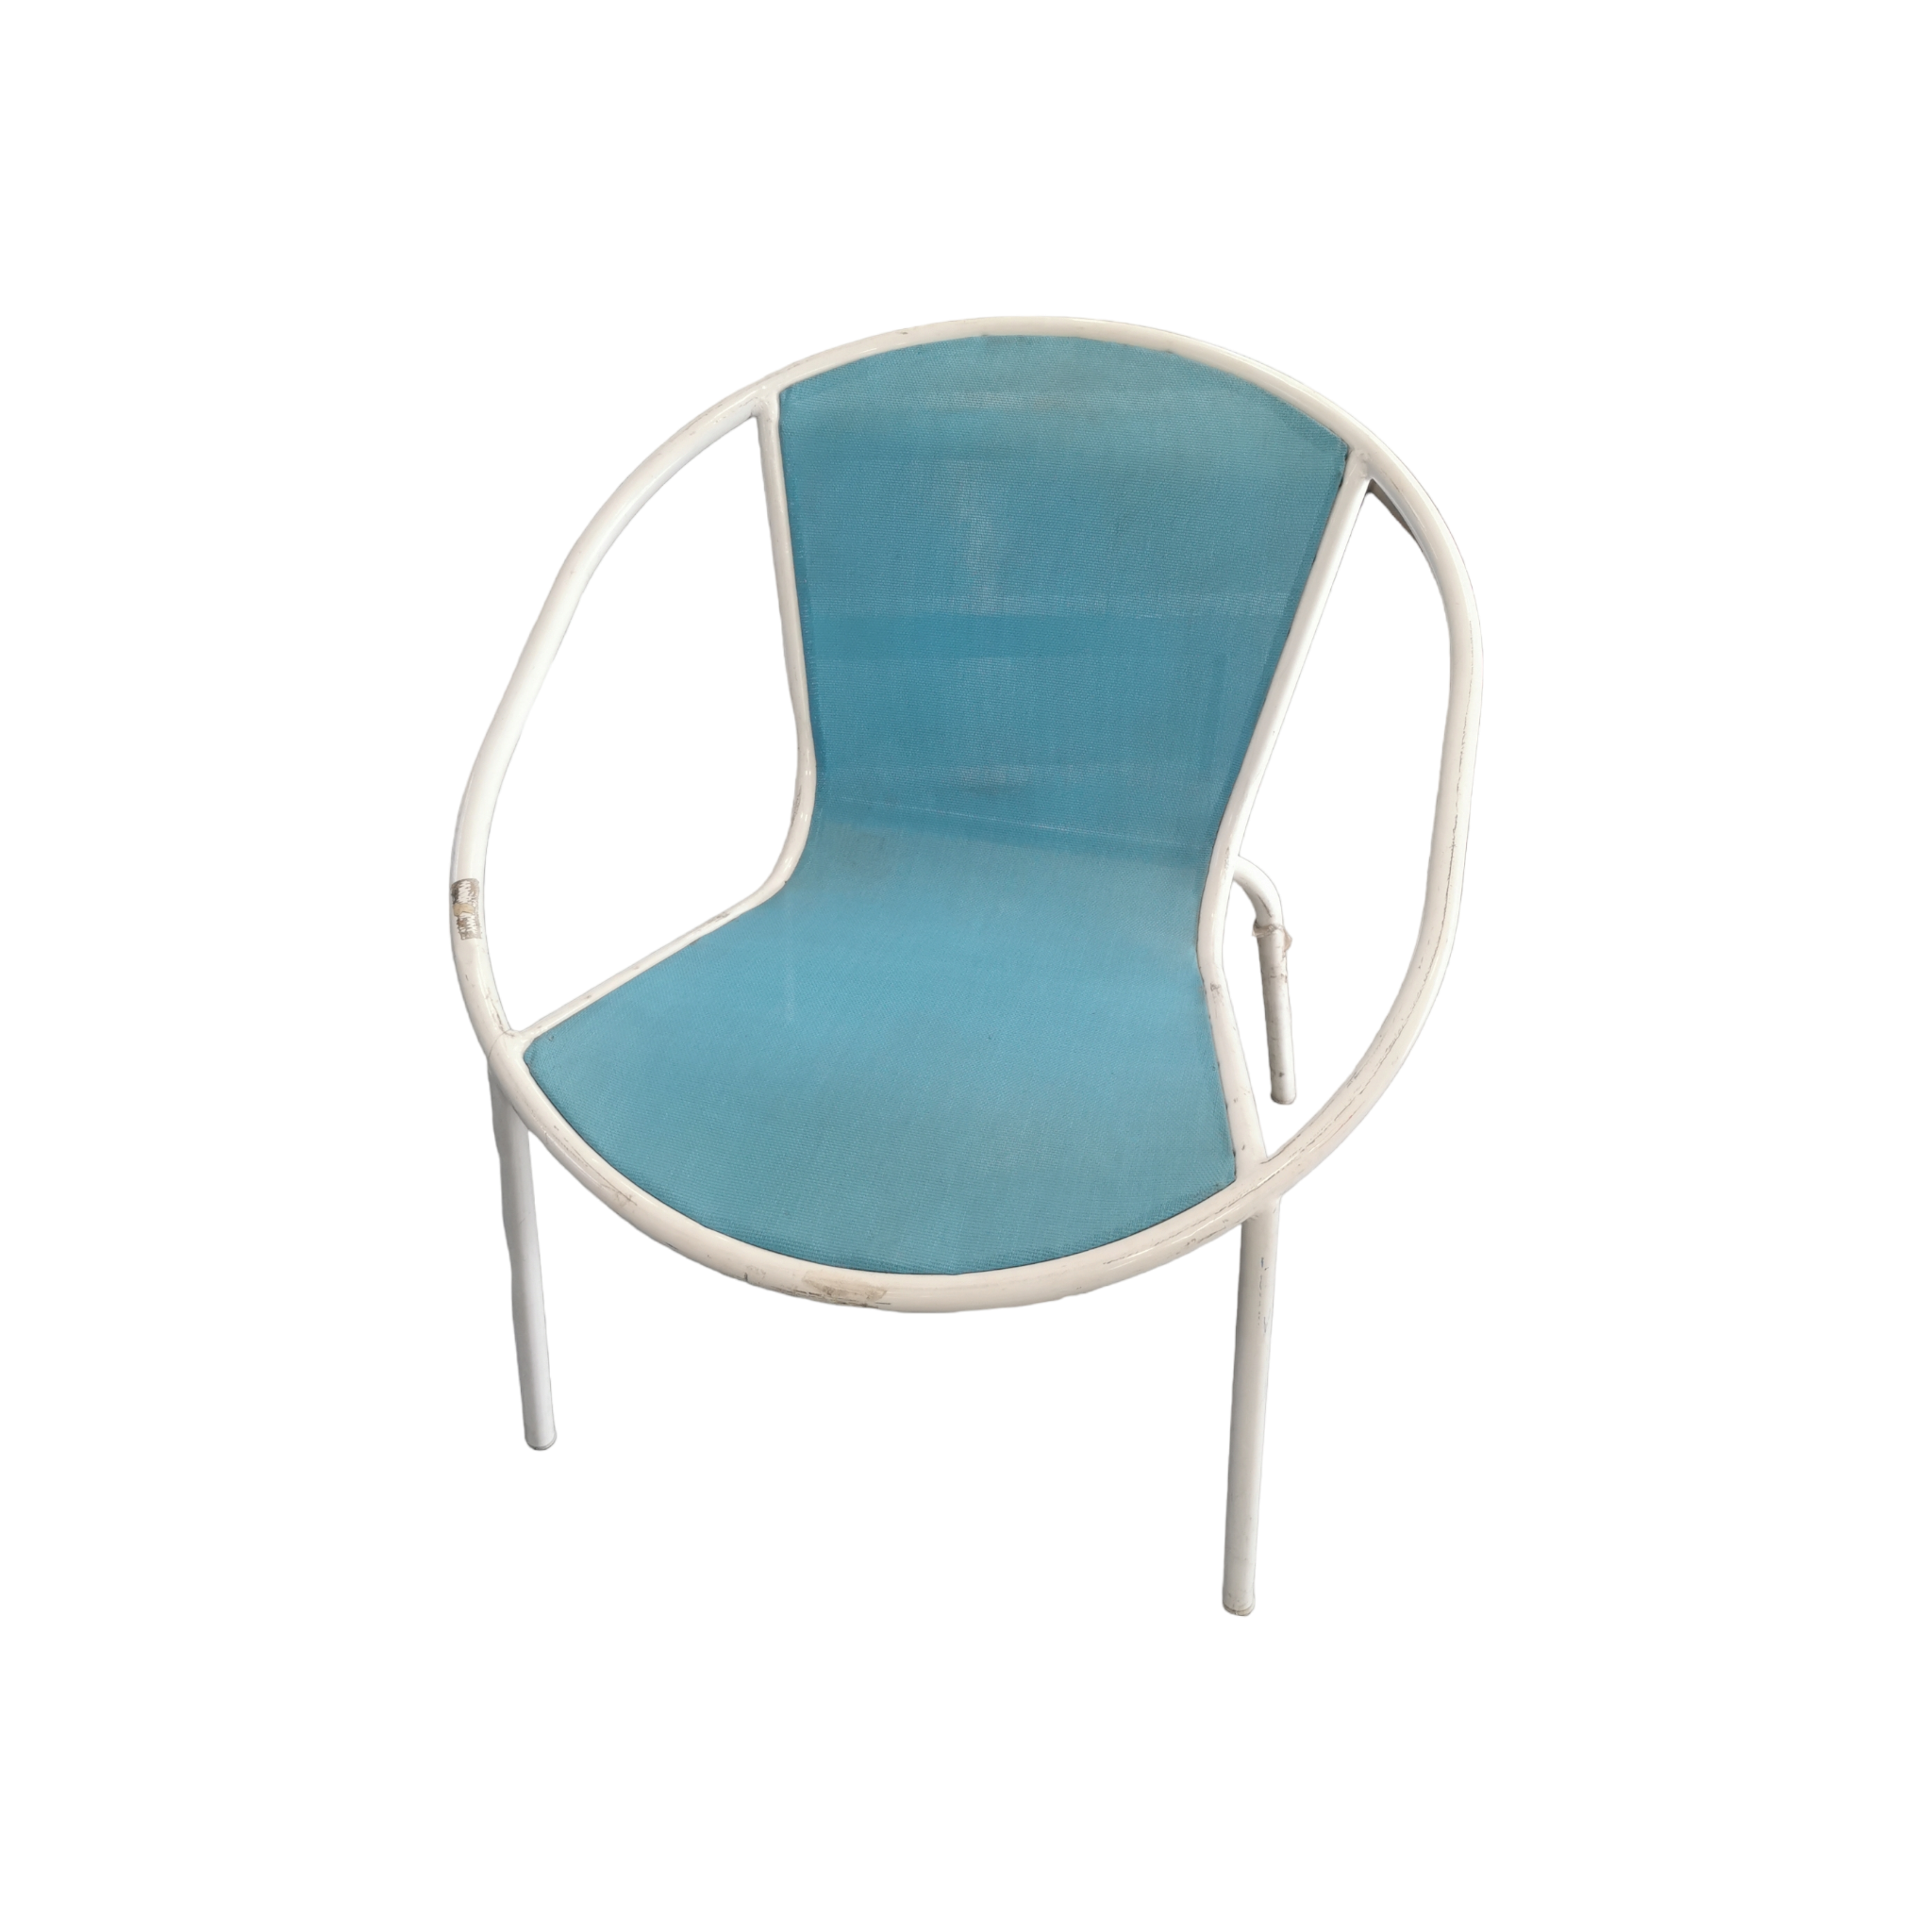 Papasan Patio Chair Baby Blue with White Steel Frame